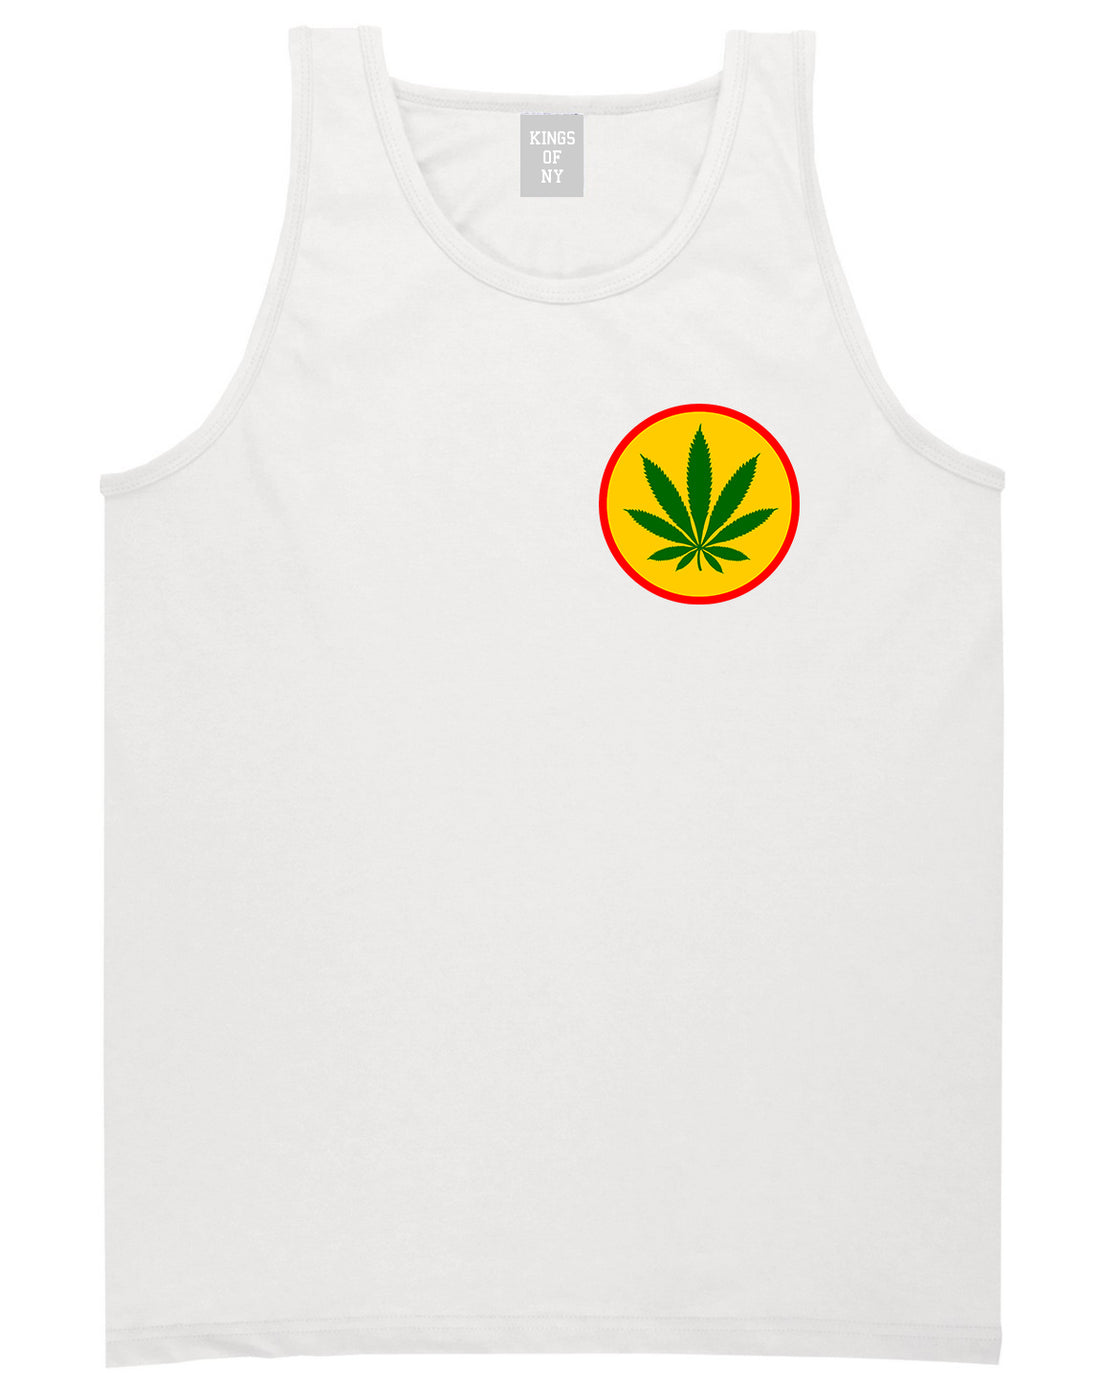 Ganja Green Weed Leaf Chest Mens White Tank Top Shirt by KINGS OF NY